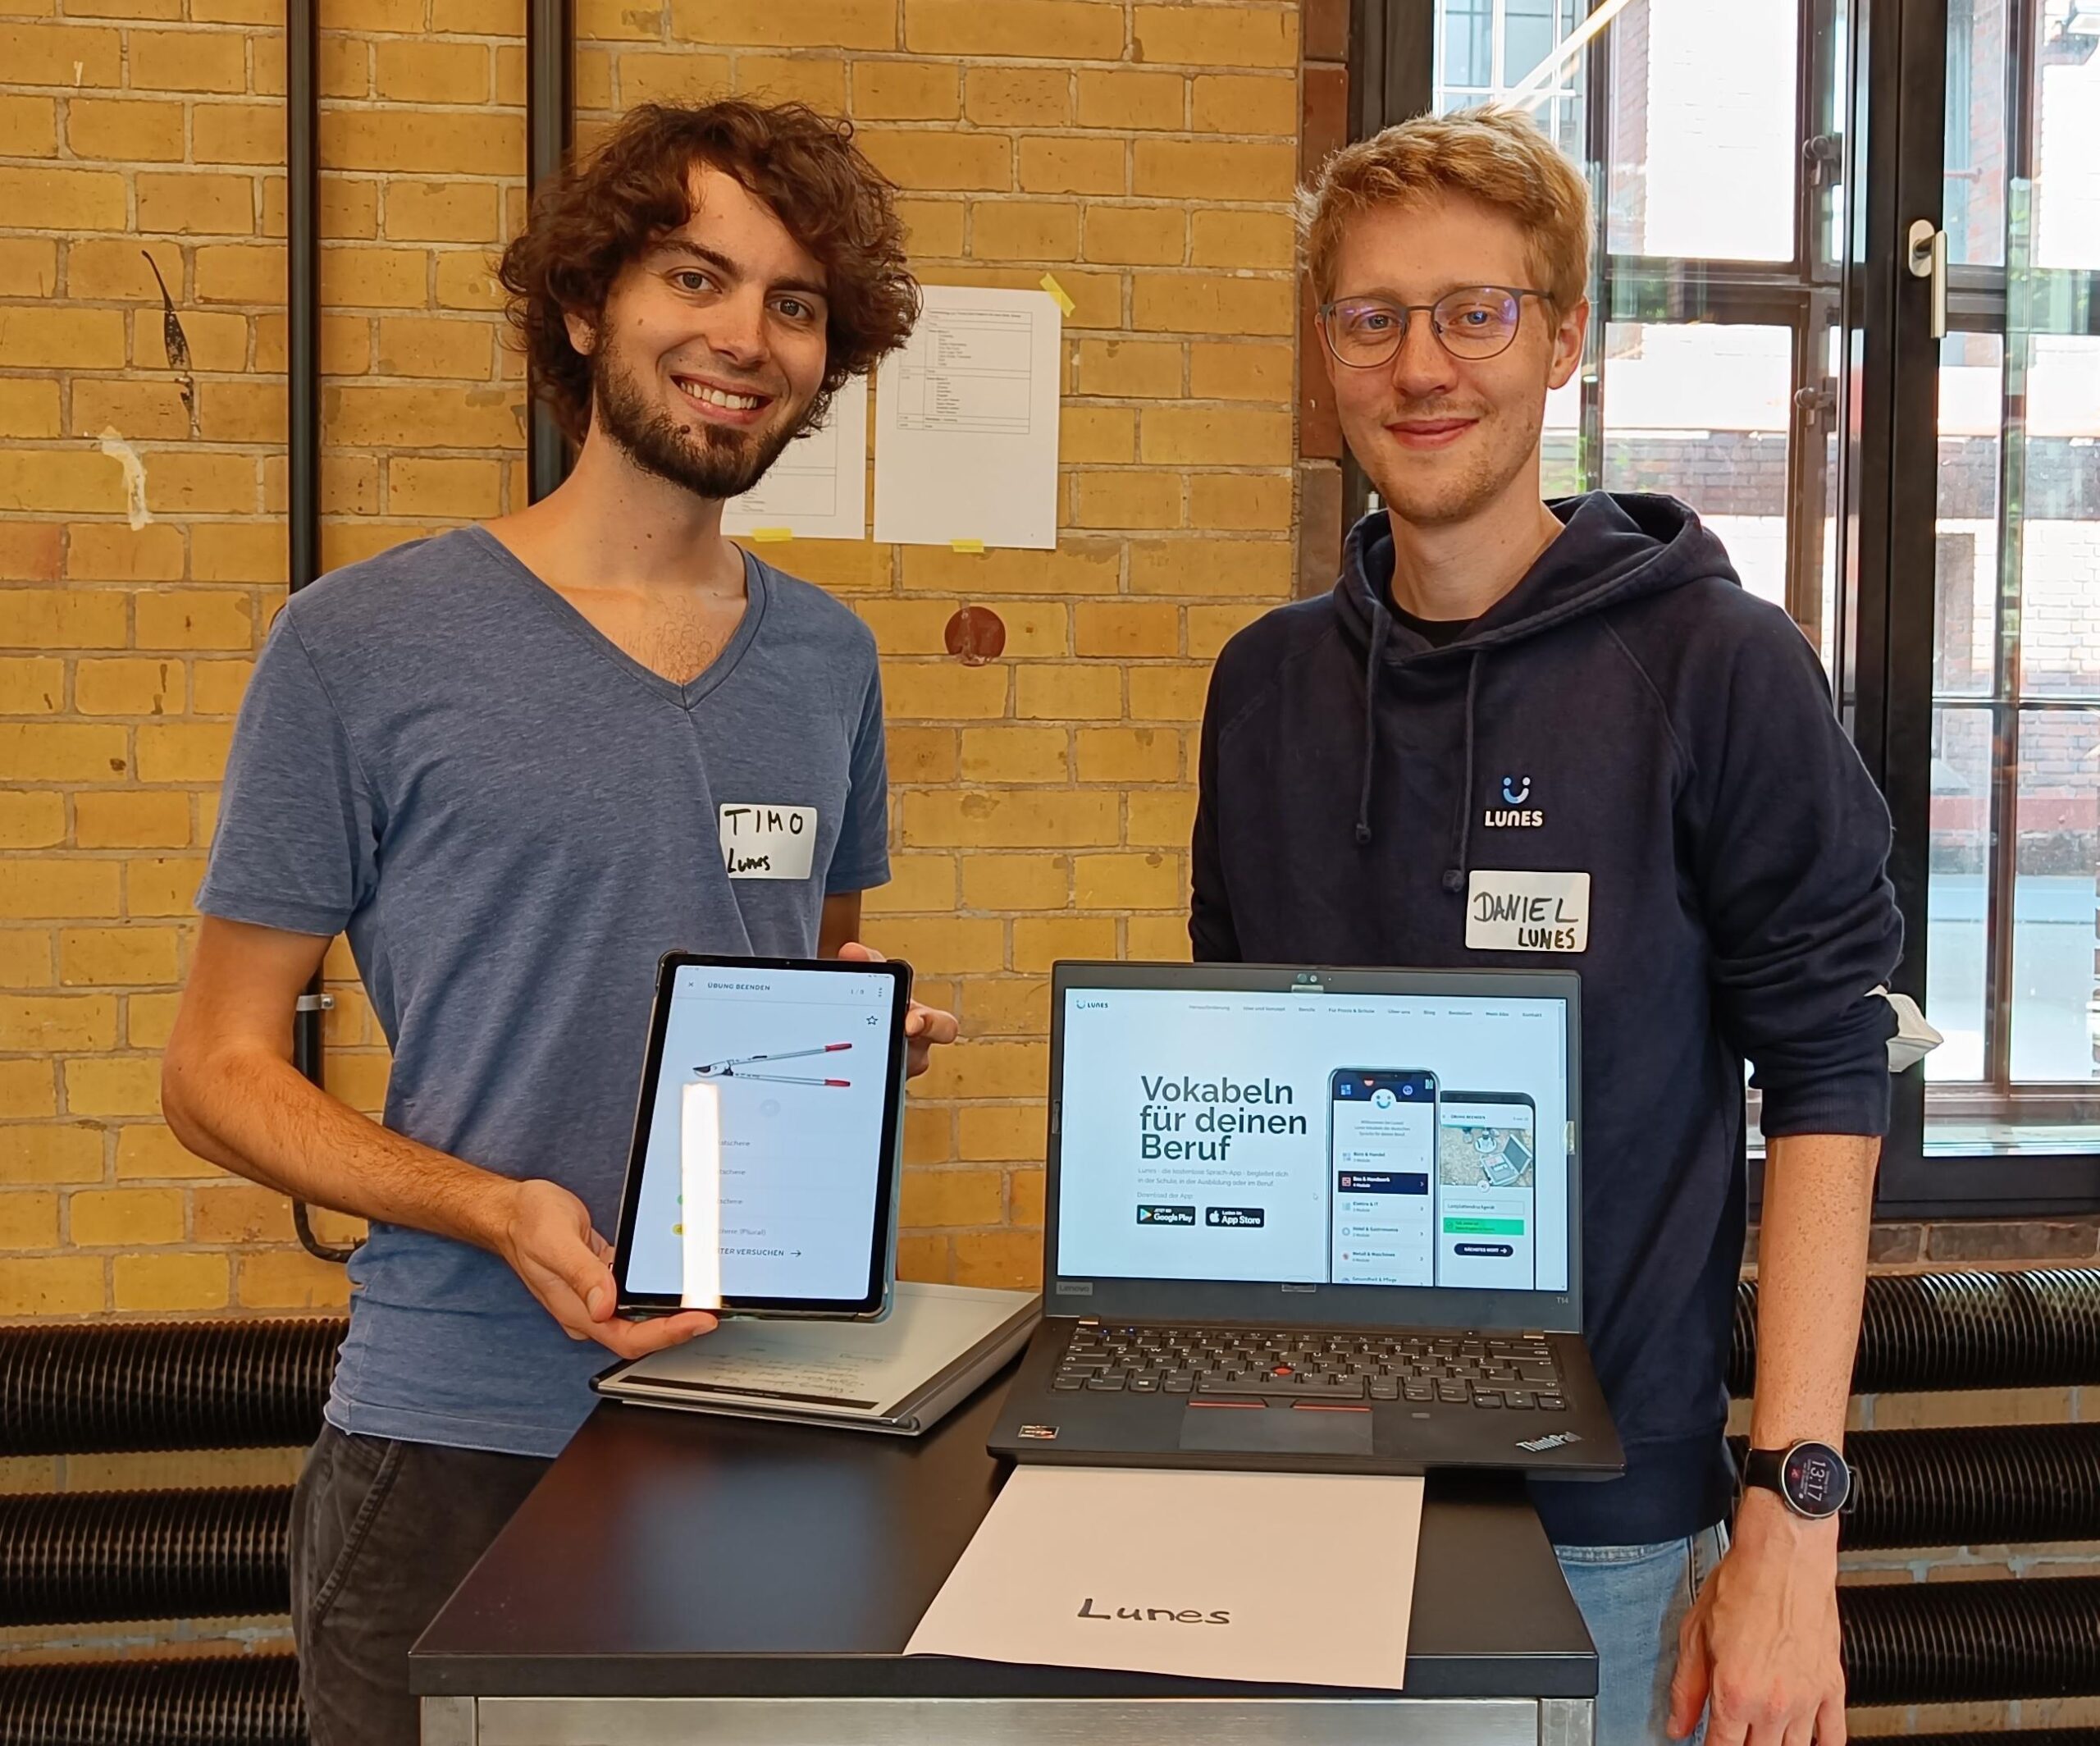 Daniel Kehne und Timo Ludwig beim Demo Day des Protype Funds in Berlin